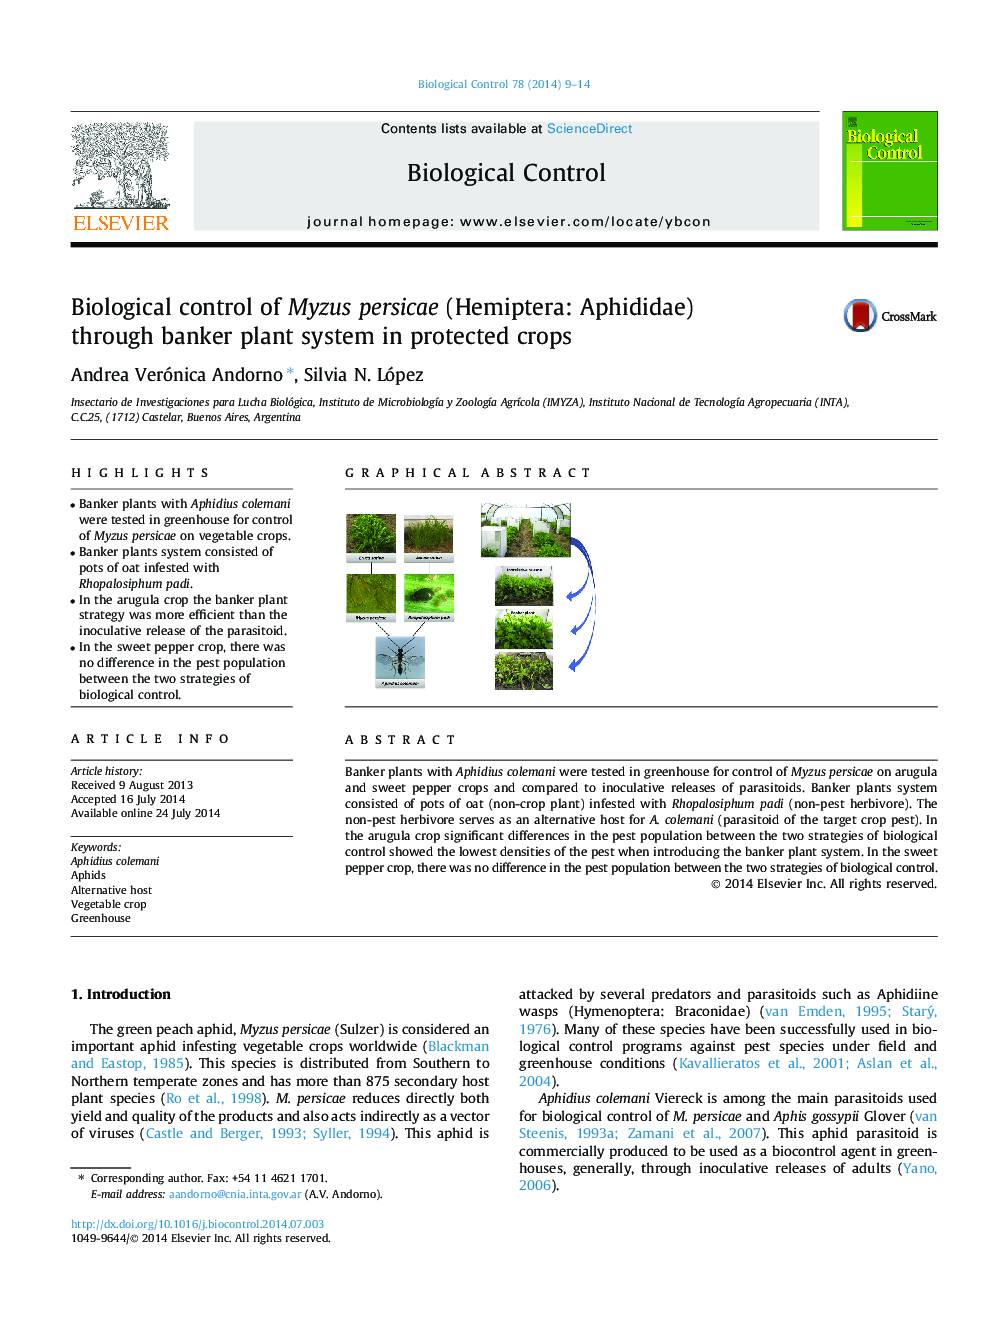 Biological control of Myzus persicae (Hemiptera: Aphididae) through banker plant system in protected crops